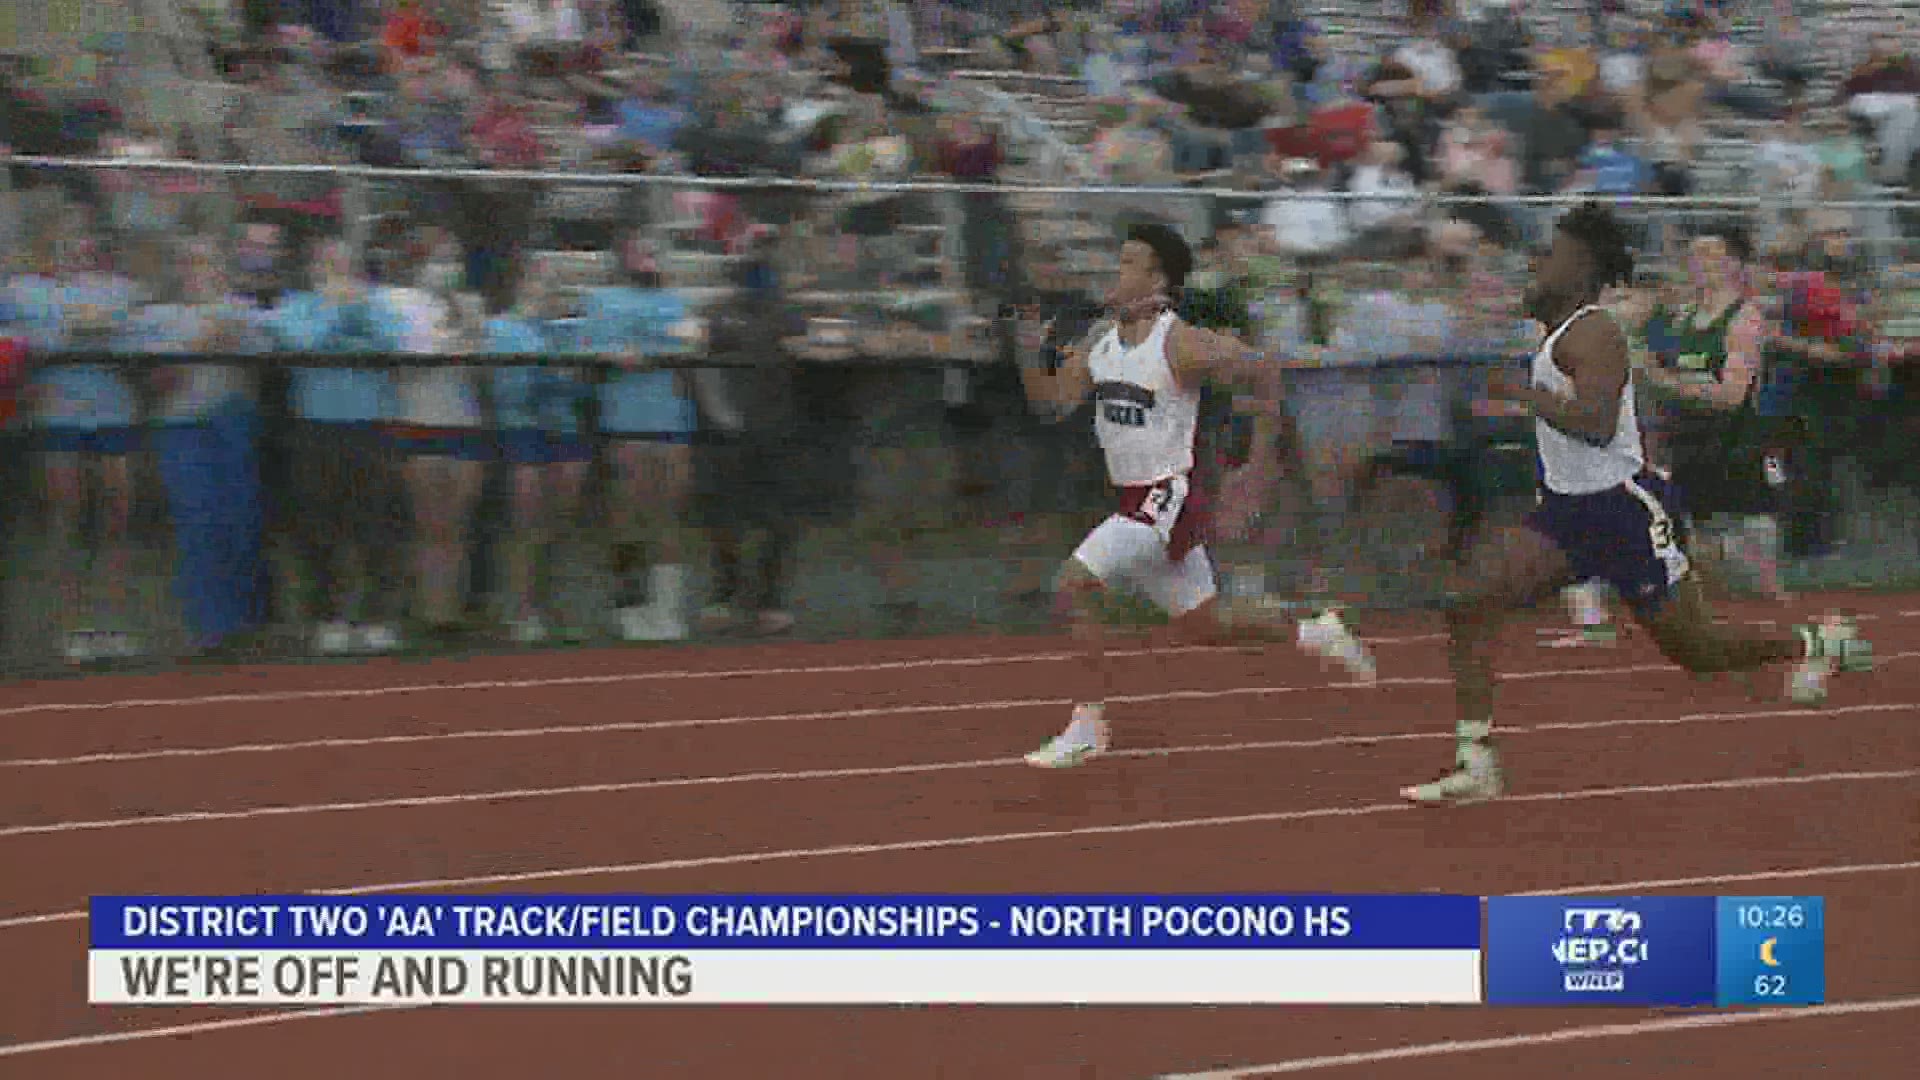 A slew of records fell in the D2 'AA' Track and Field Championships at North Pocono HS.